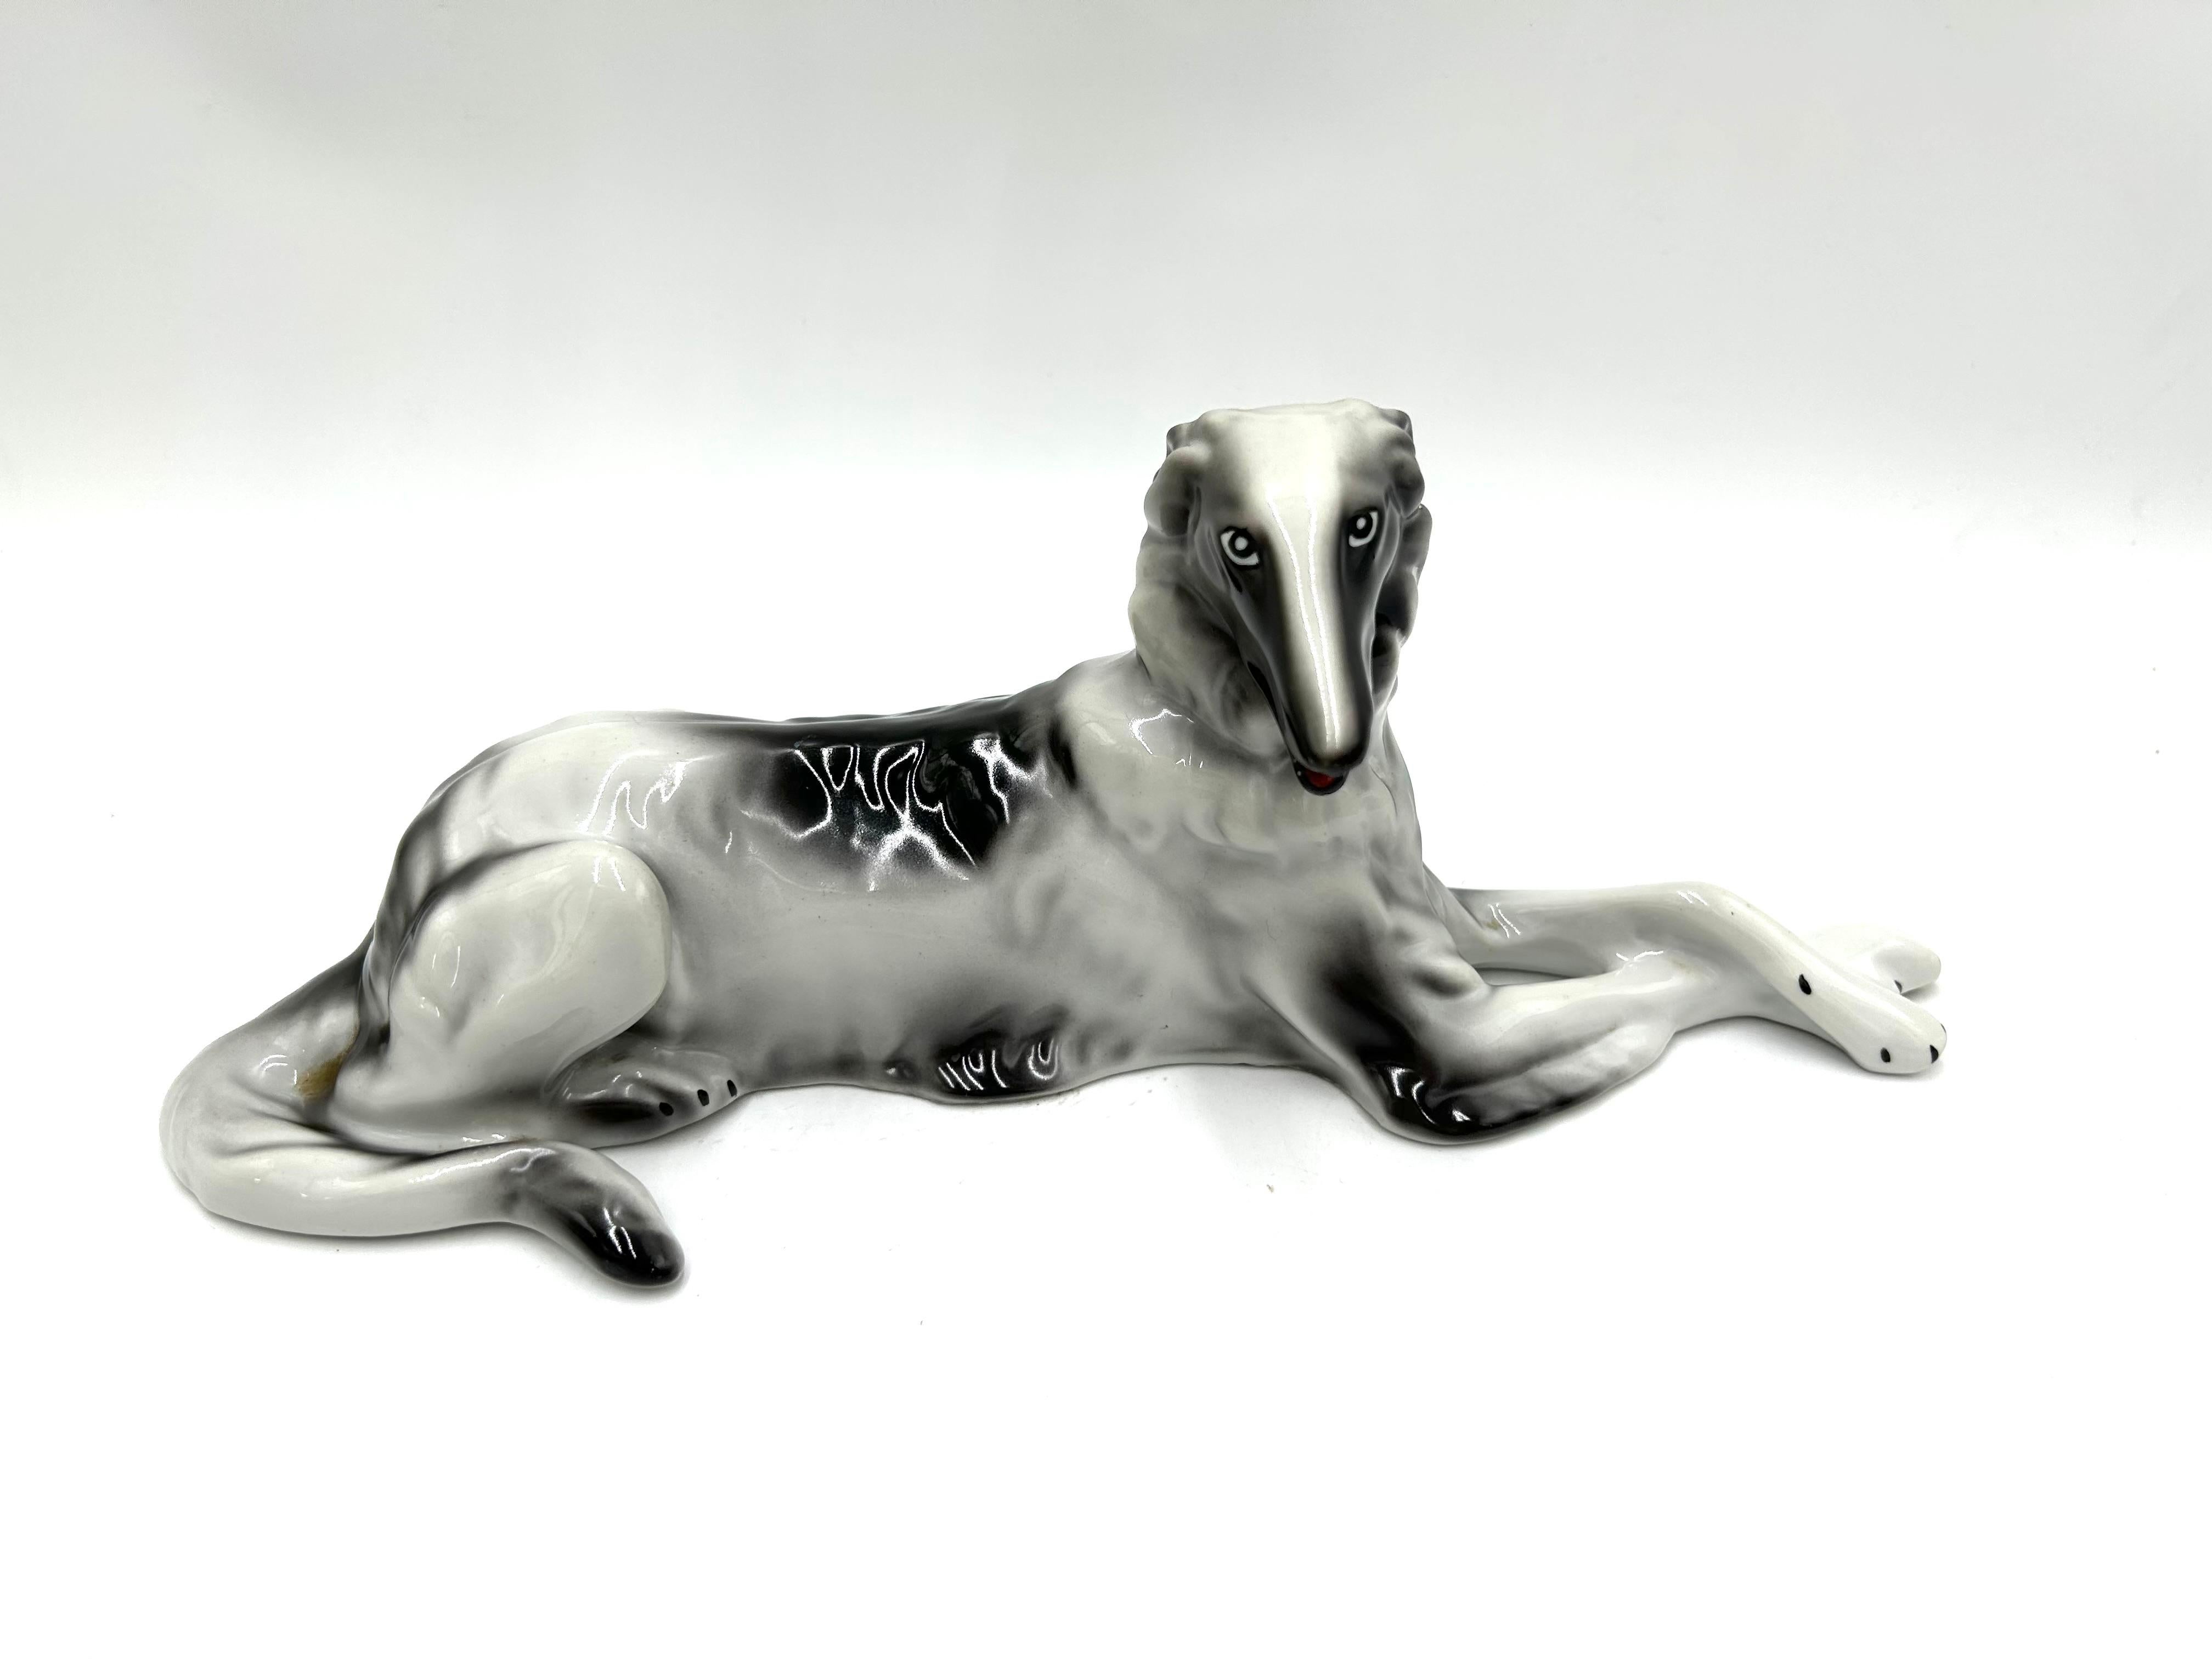 Porcelain figurine of a dog - Russian Borzoi Greyhound

Produced by Walbrzych in the 1960s.

Very good condition, no damage.

Measures: Height 12cm, width 31cm, depth 10cm.